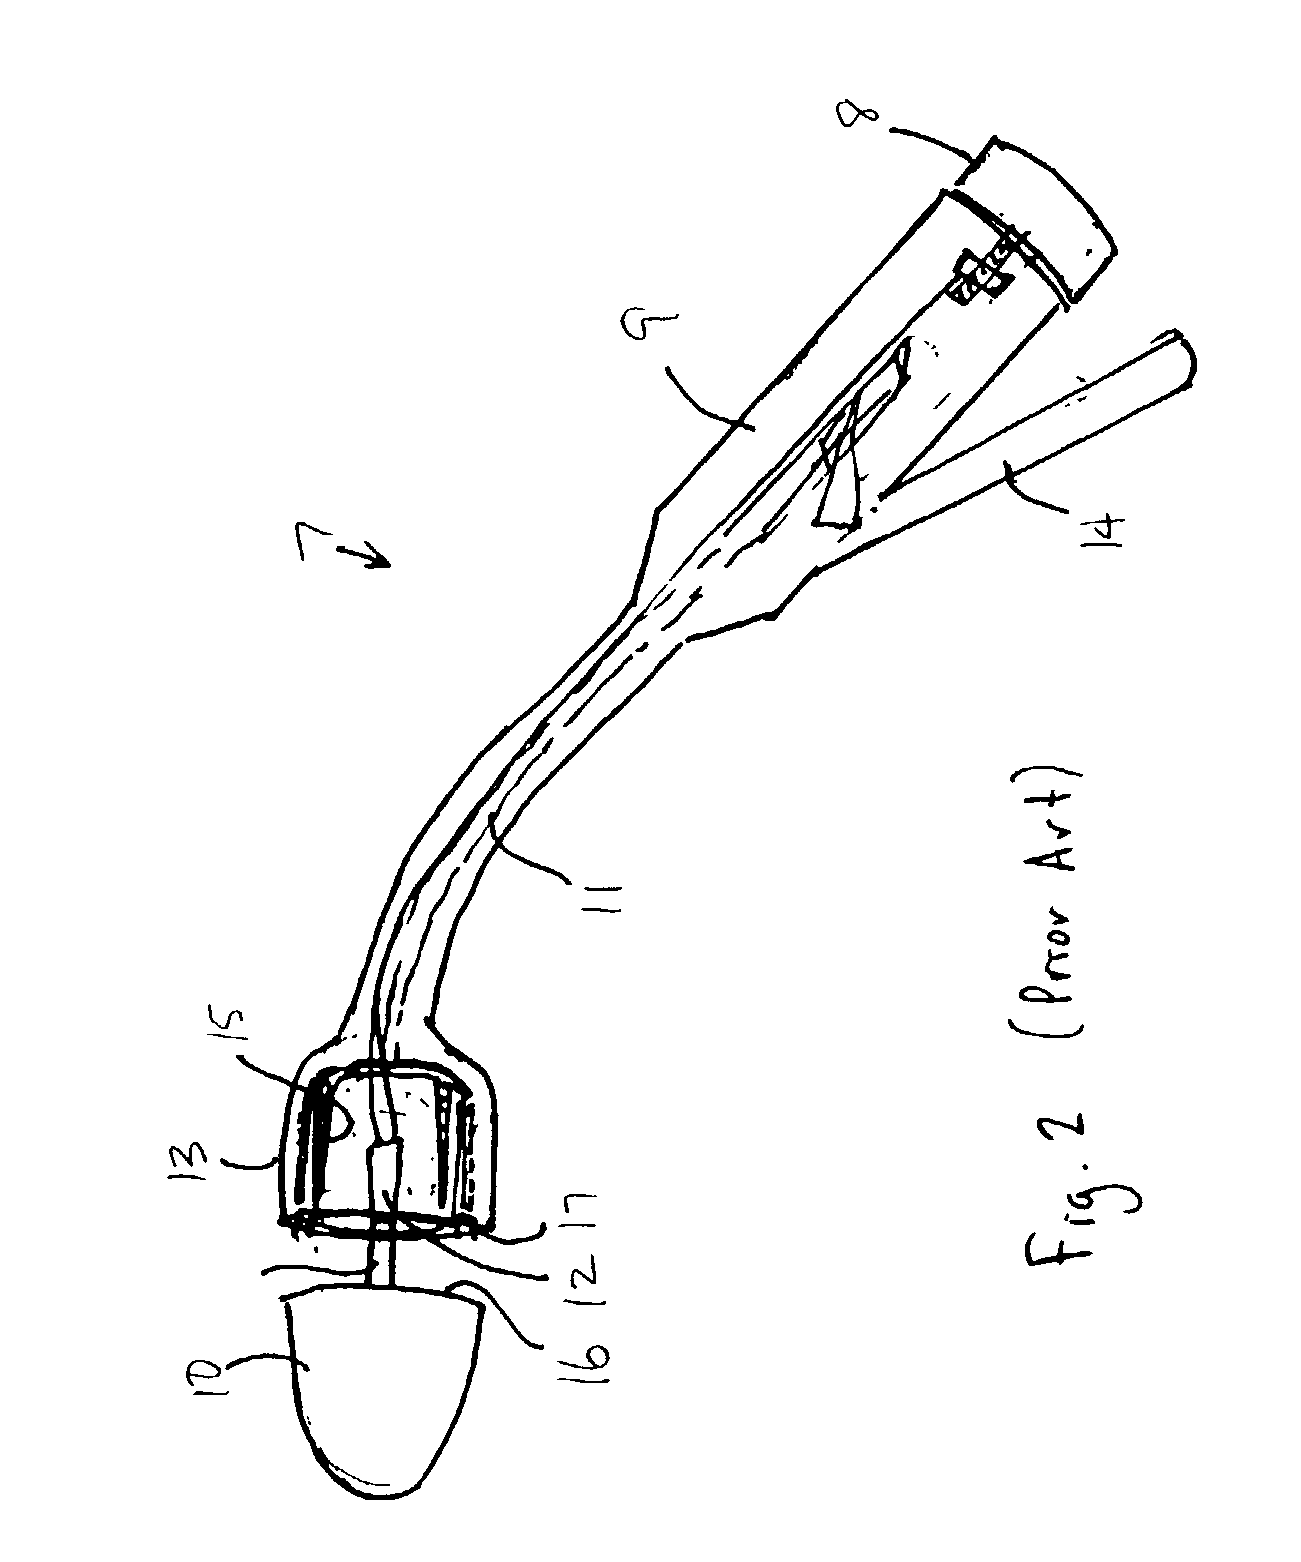 Fluid delivery device for use with anastomosing stapling, and resecting instruments